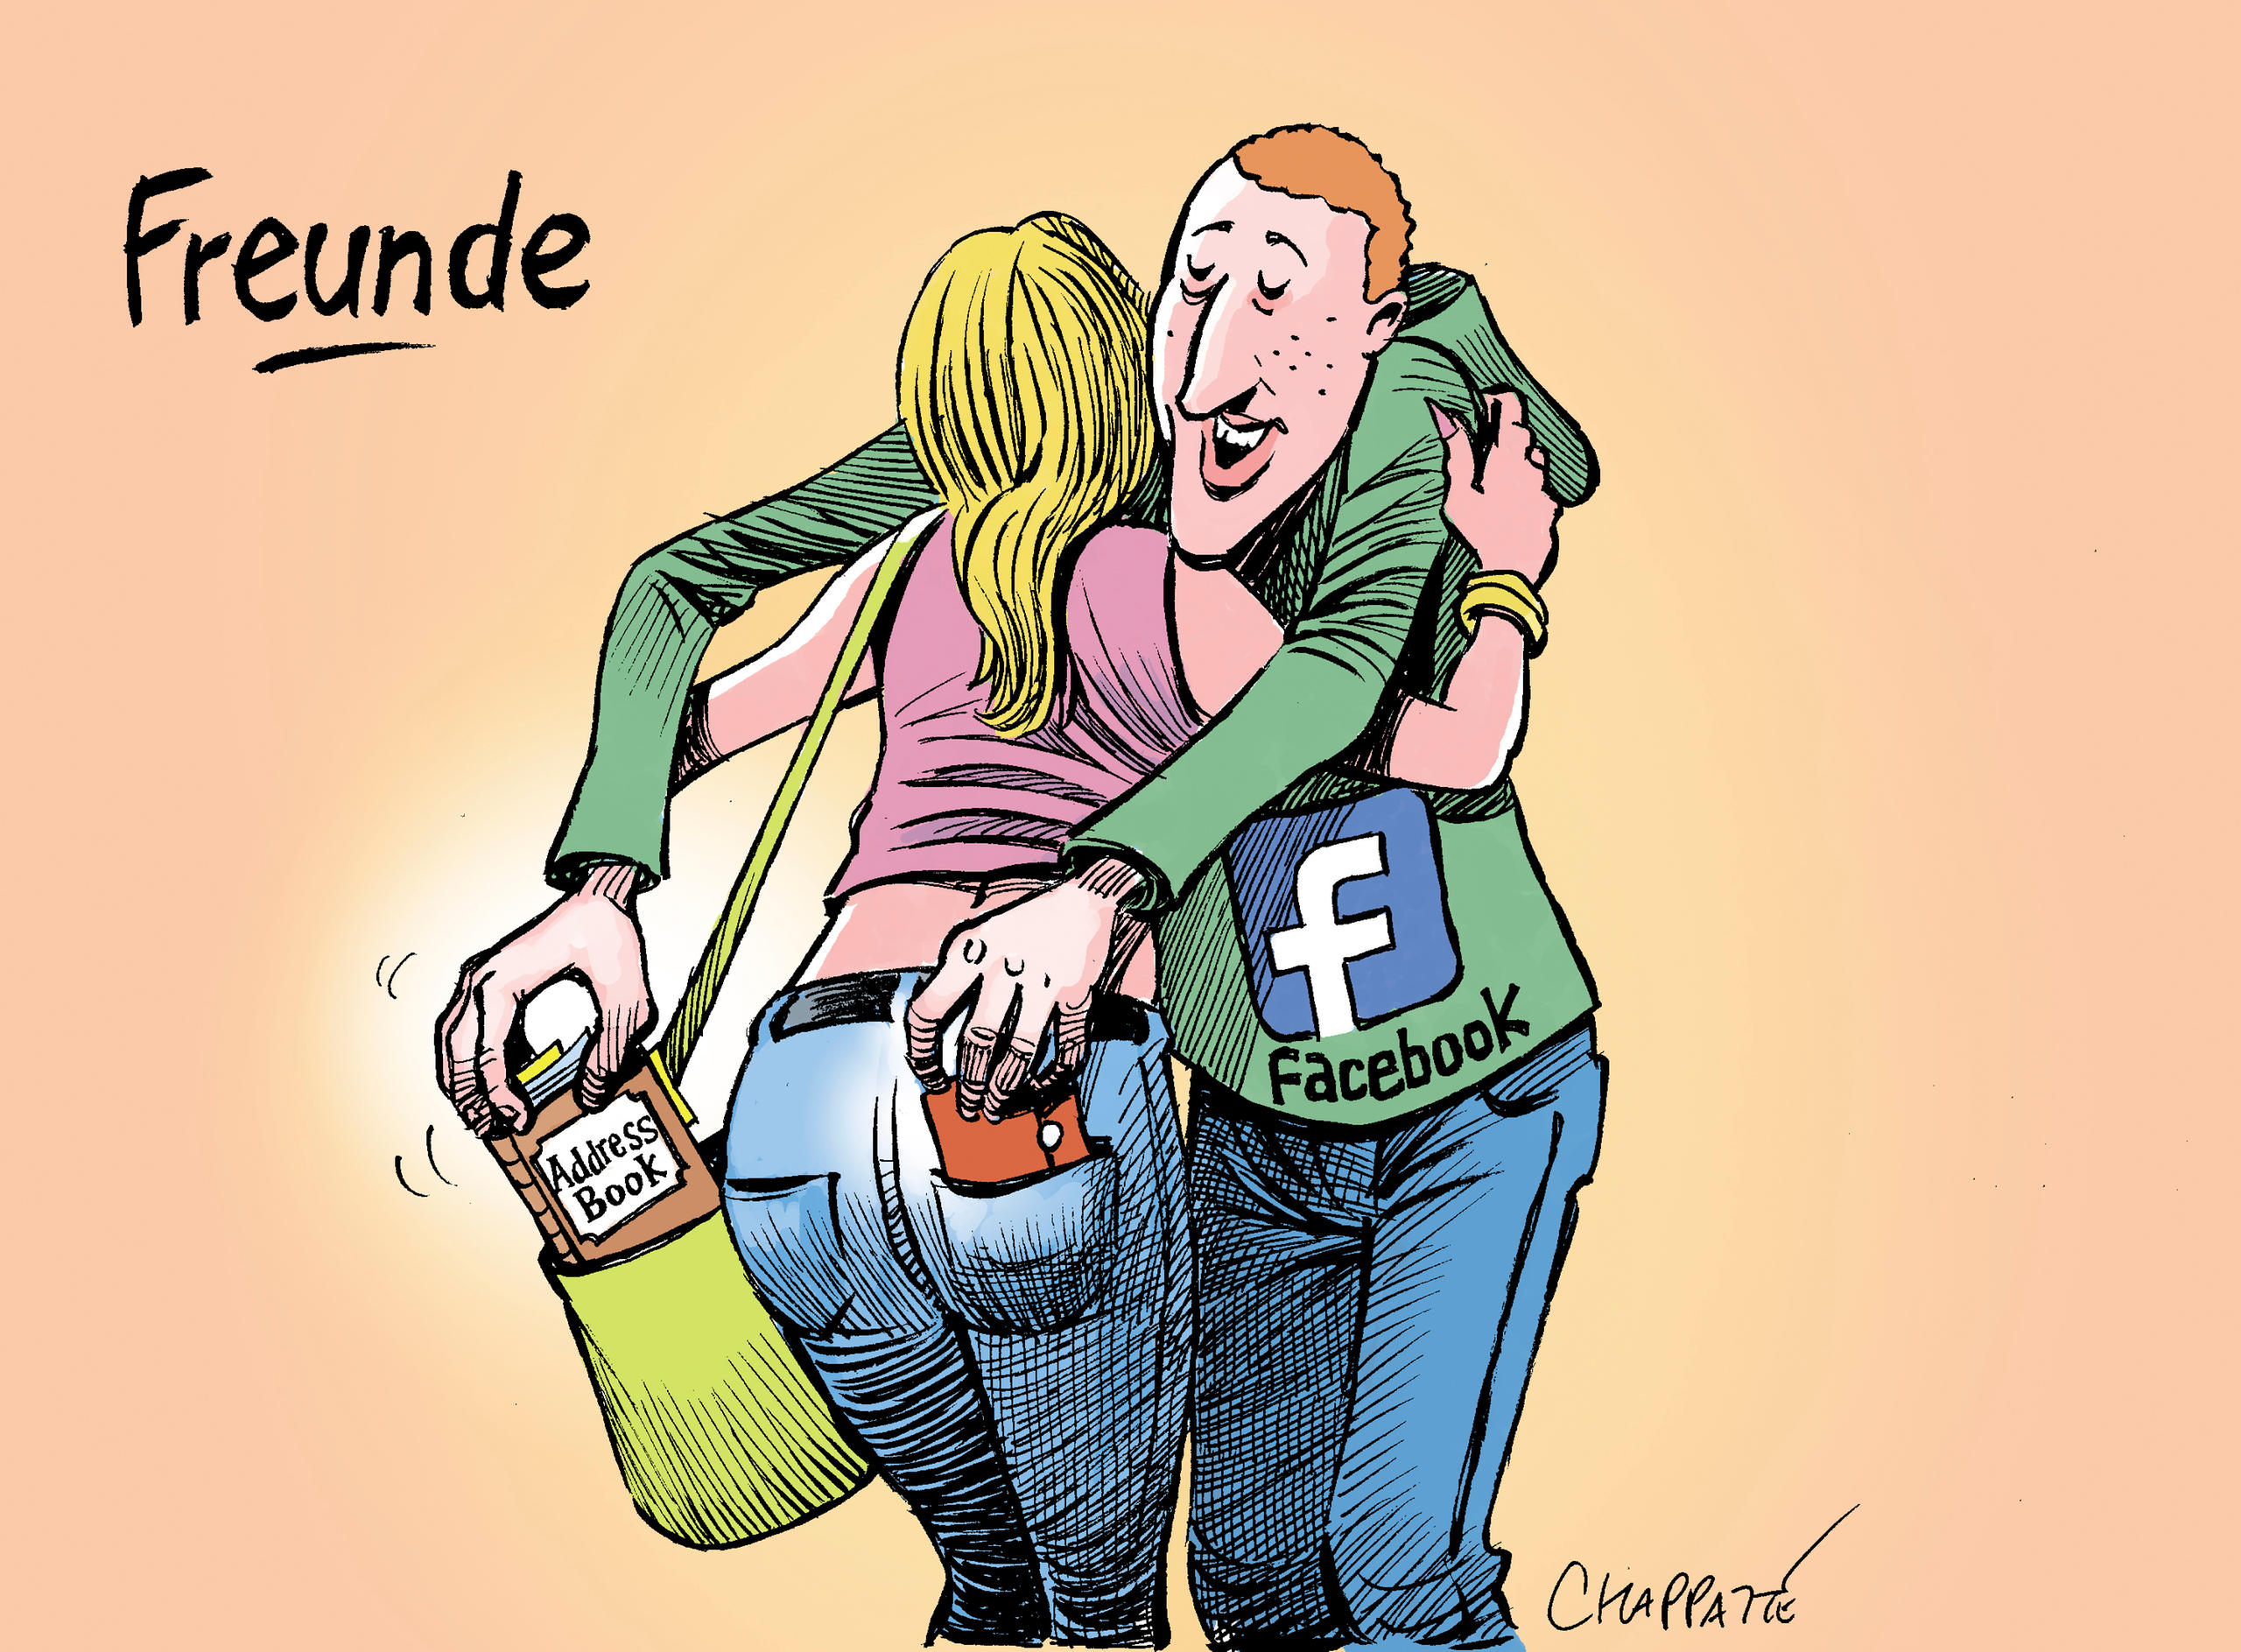 A man and woman hug with facebook sticker on jacket